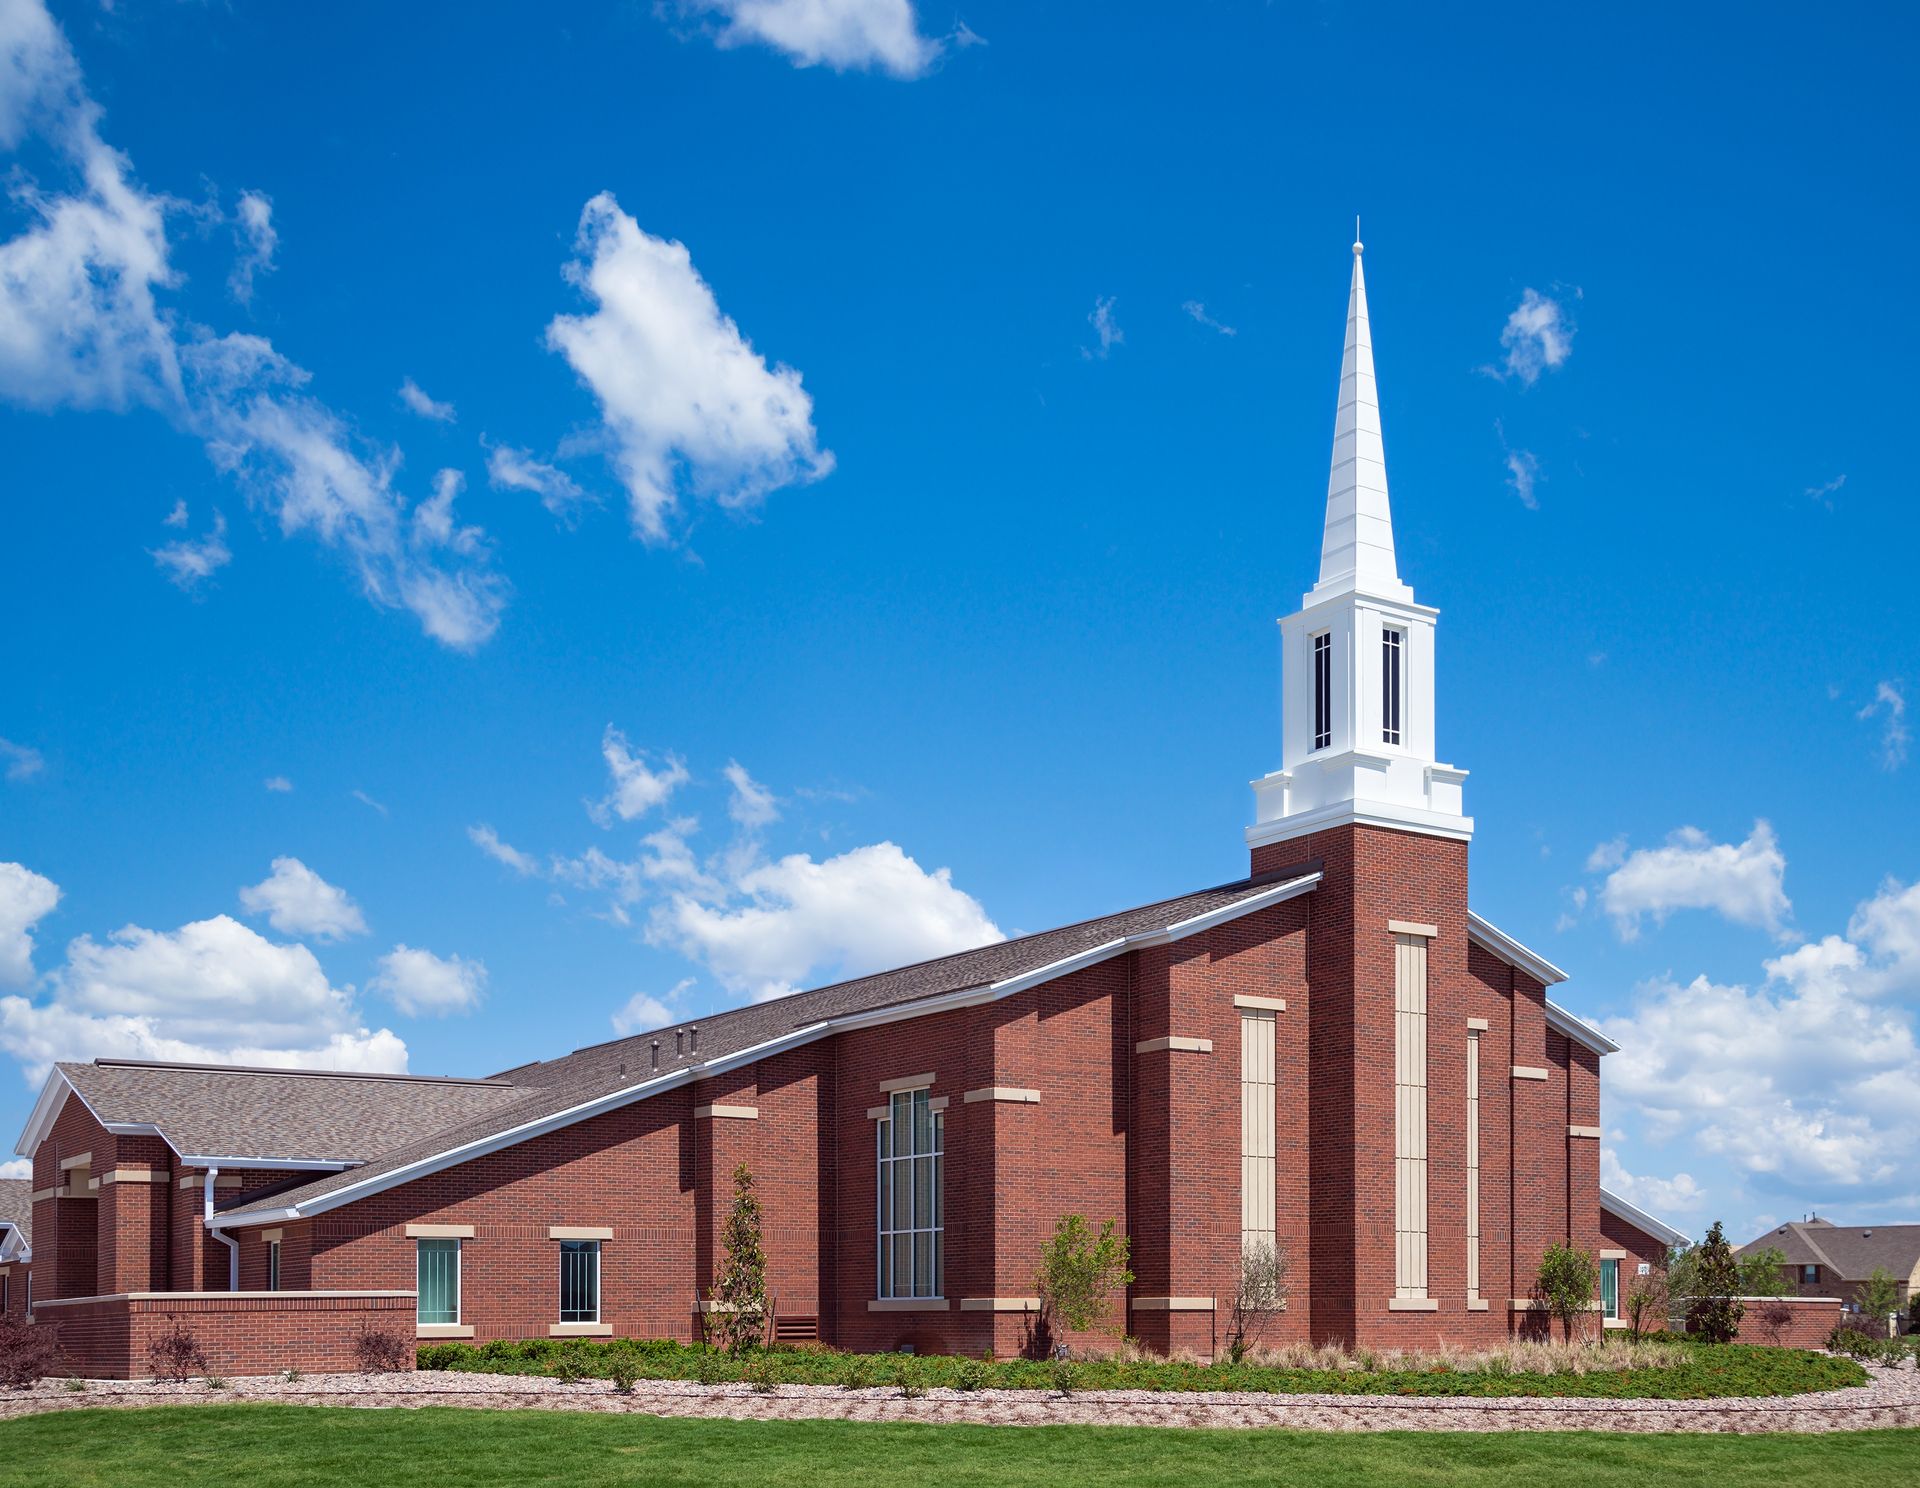 A brick meetinghouse with a white steeple. © undefined ipCode 1.